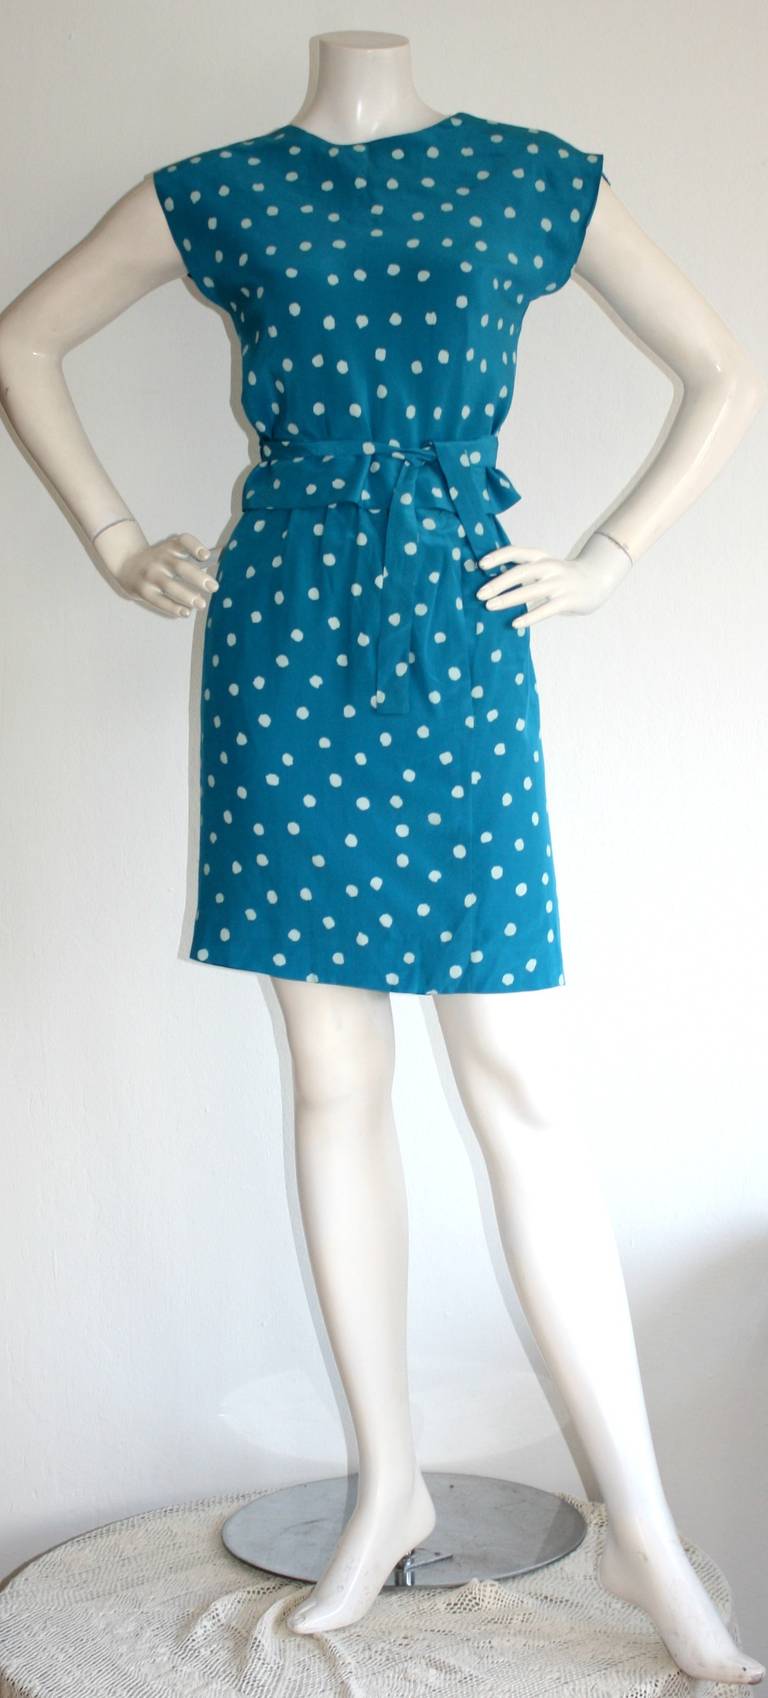 Cute vintage Oscar de la Renta blue silk polka dot skirt and wrap blouse ensemble. High waisted skirt, with a wrap tie blouse. Perfect alone, or as separates. Great for night or day. Pair with sandals, wedges or heels. One pocket on side of skirt.